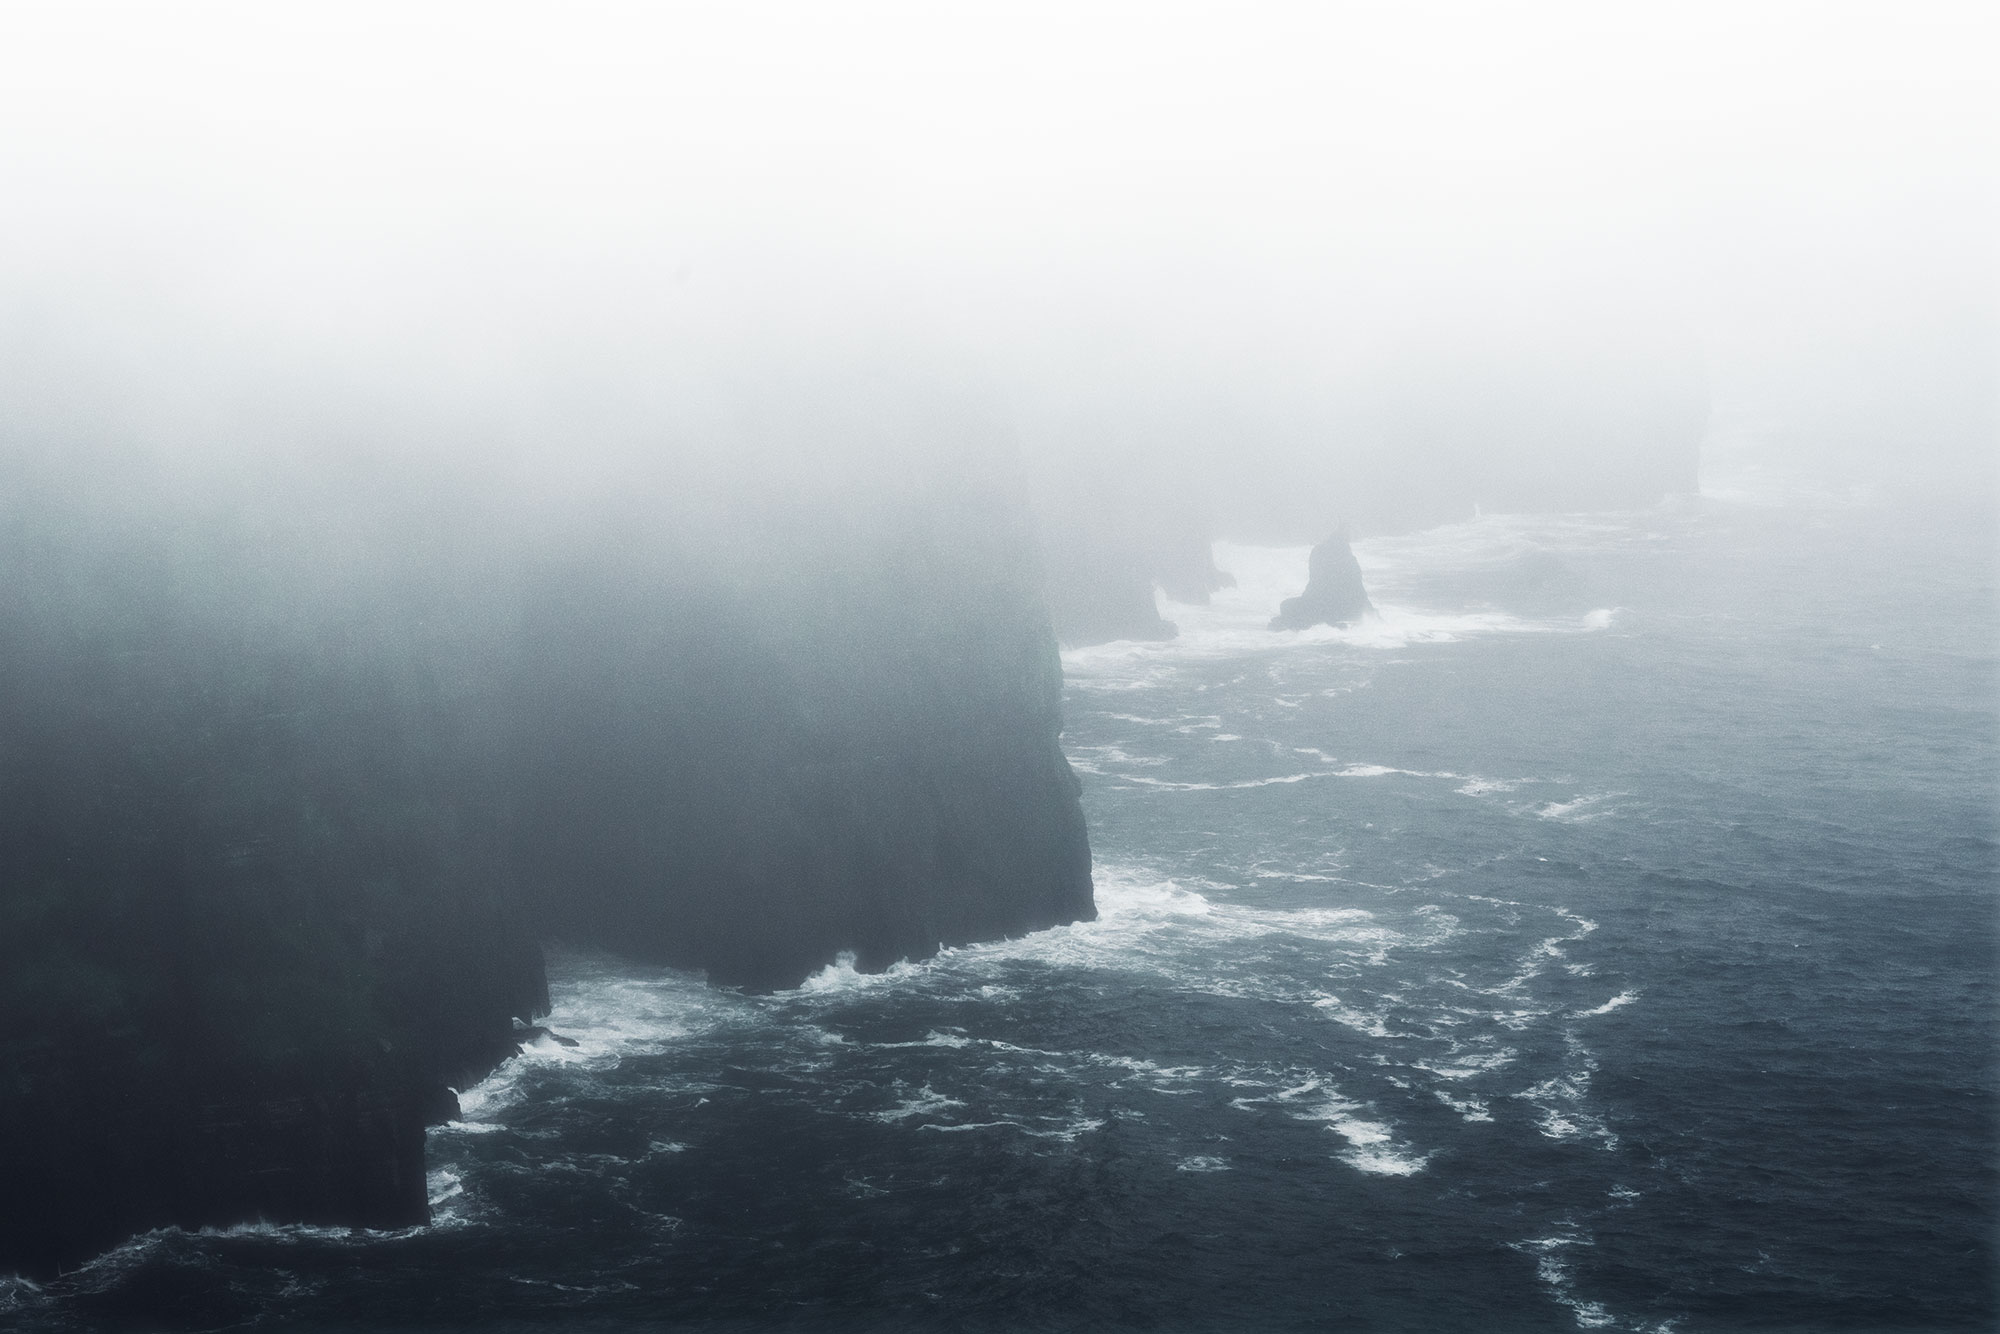 Epic and dramatic landscape photograph capturing the Cliffs of Moher in Ireland. The cliffs are enveloped in thick fog, creating a moody and mysterious atmosphere. The rugged coastline and towering cliffs are shrouded in mist, adding to the dramatic allure of the scene.